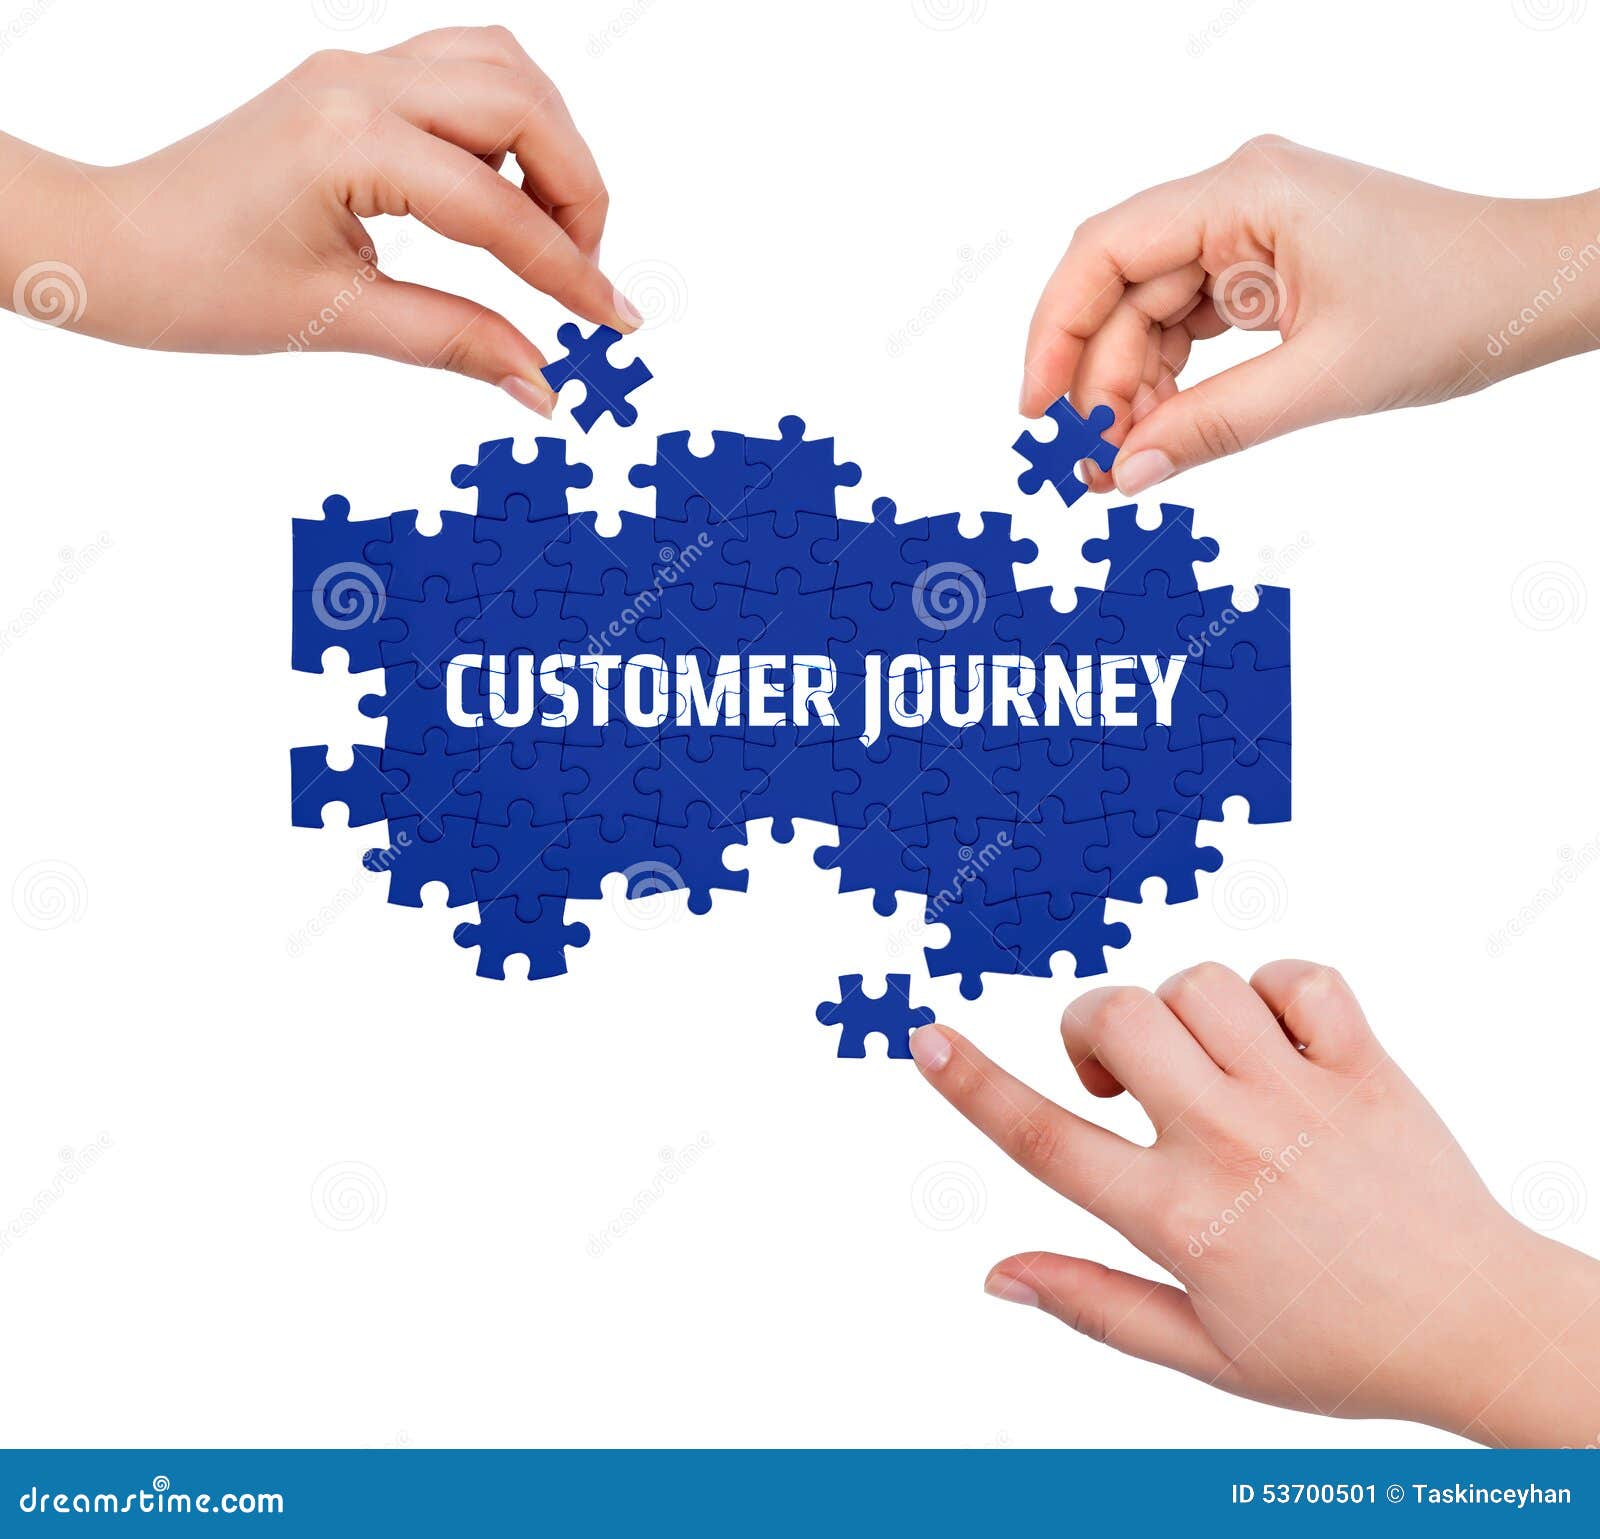 hands with puzzle making customer journey word